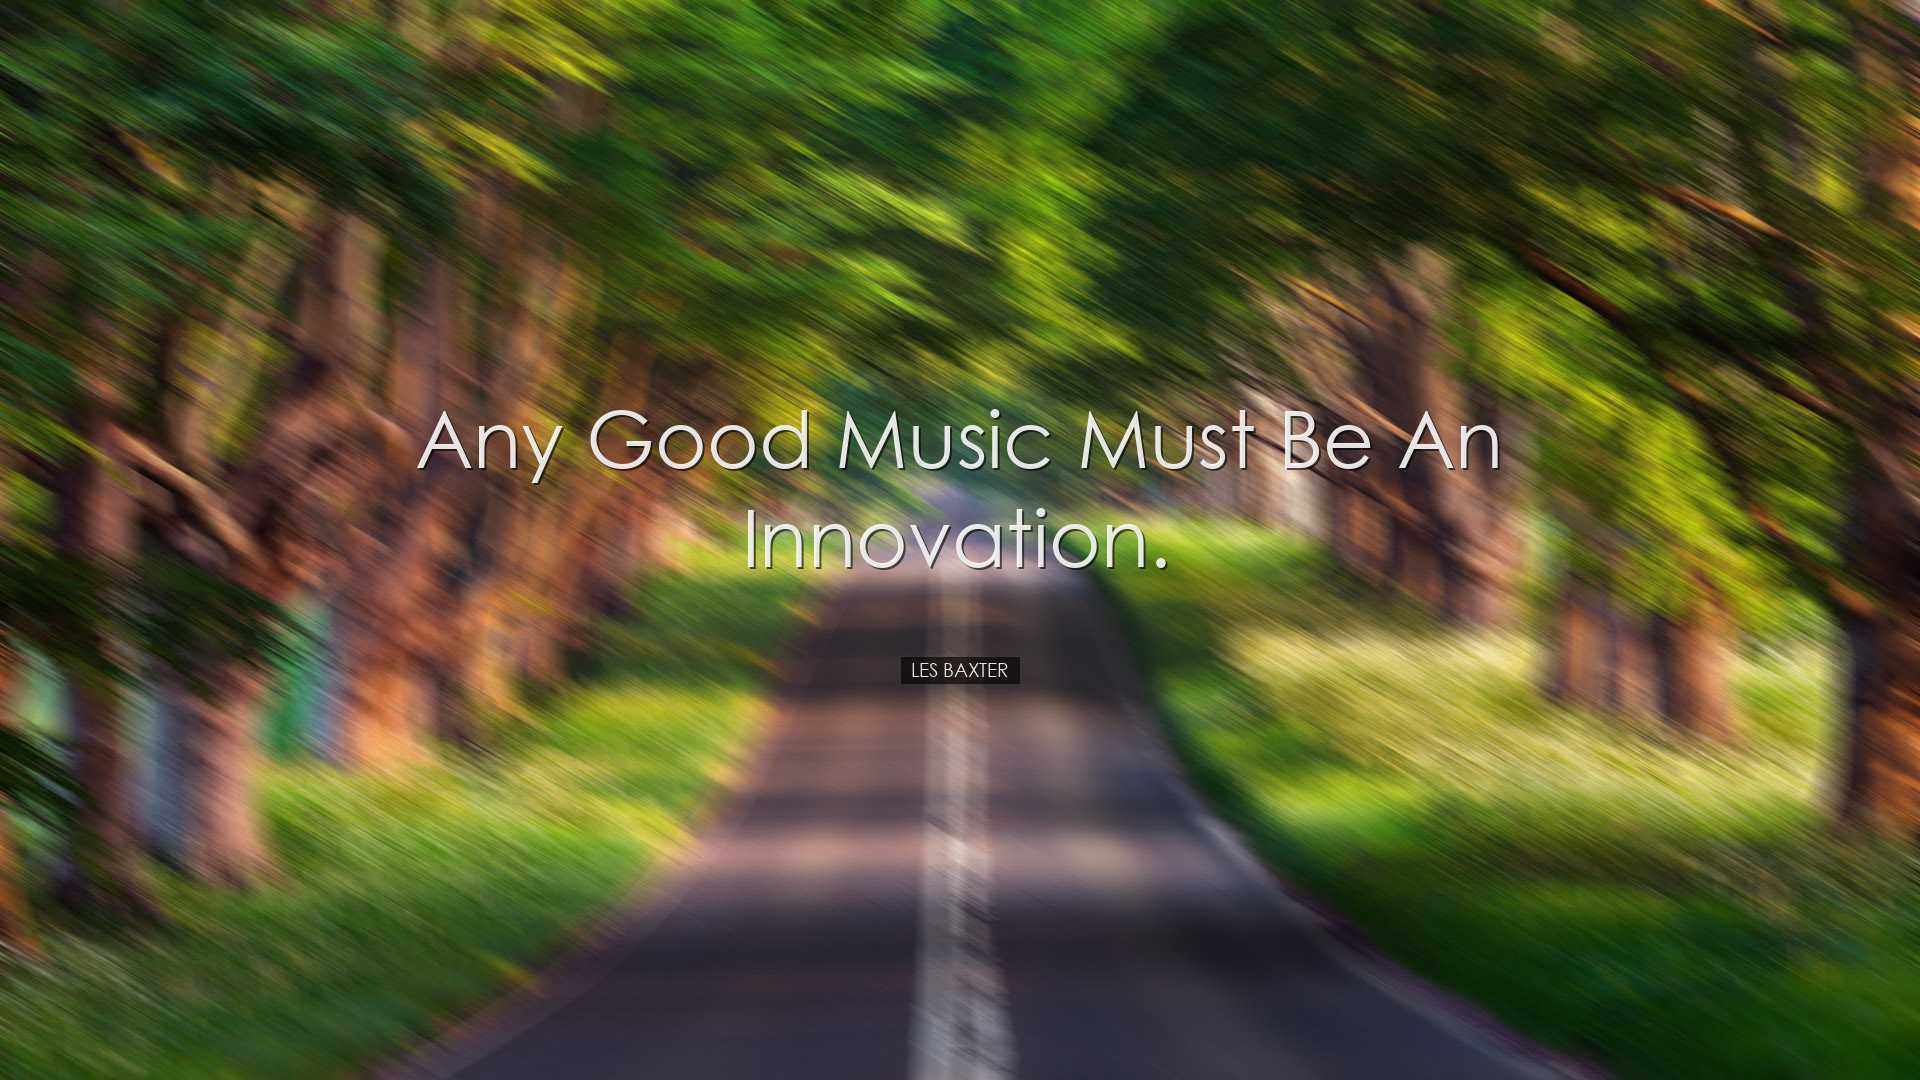 Any good music must be an innovation. - Les Baxter